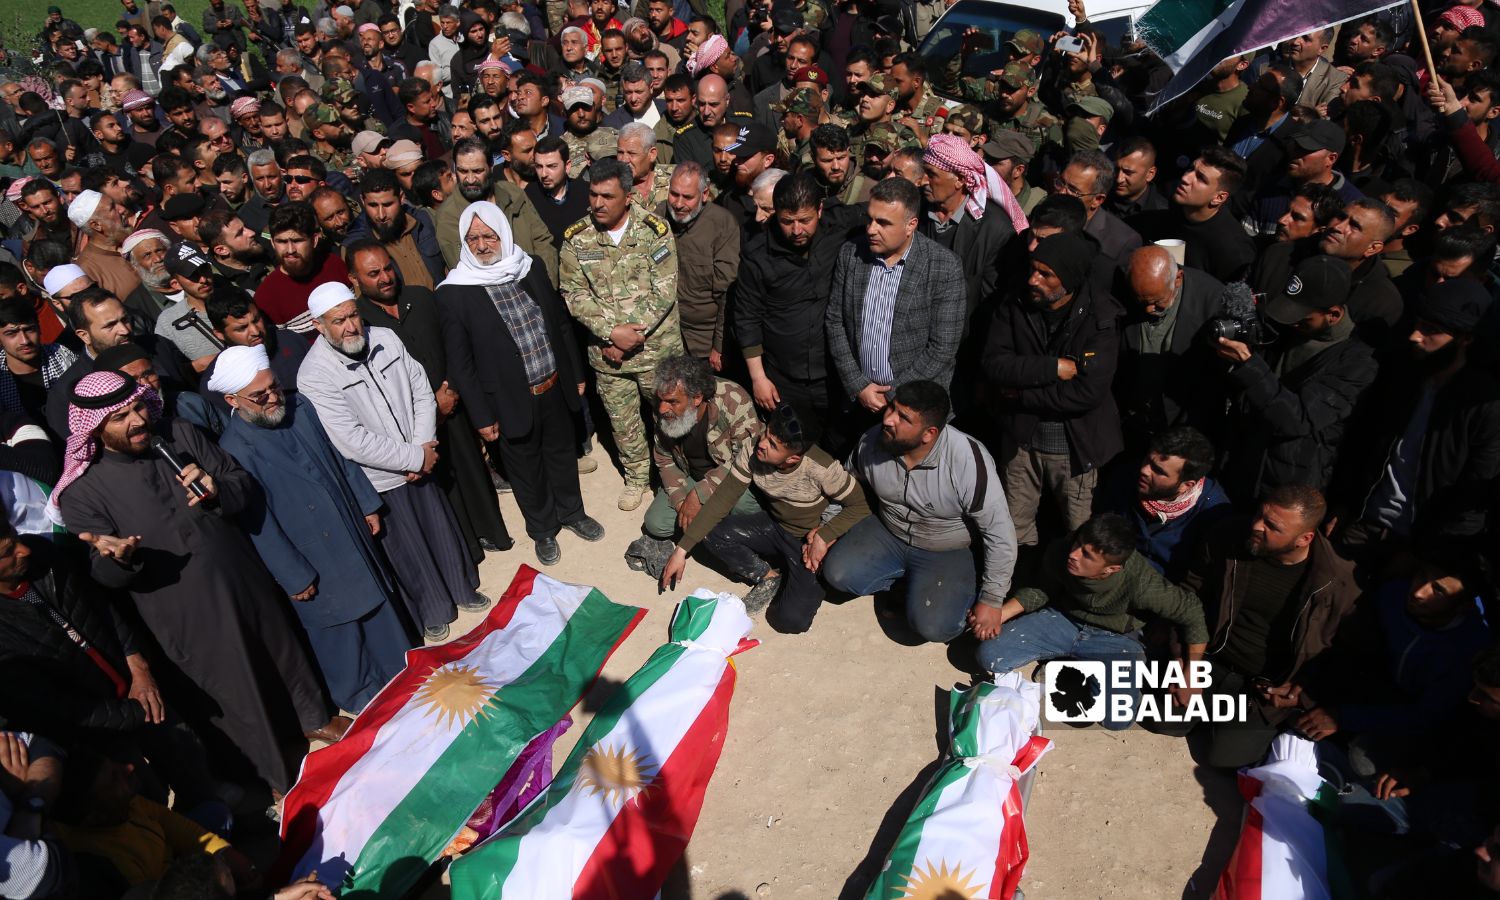 Minister of Defense in the Syrian Interim Government (SIG), Hassan Hamada, during the funeral of four Kurdish civilians who were killed during the celebration of Nowruz in the city of Jindires in the northern countryside of Aleppo - March 21, 2023 (Enab Baladi/Amir Kharboutli)